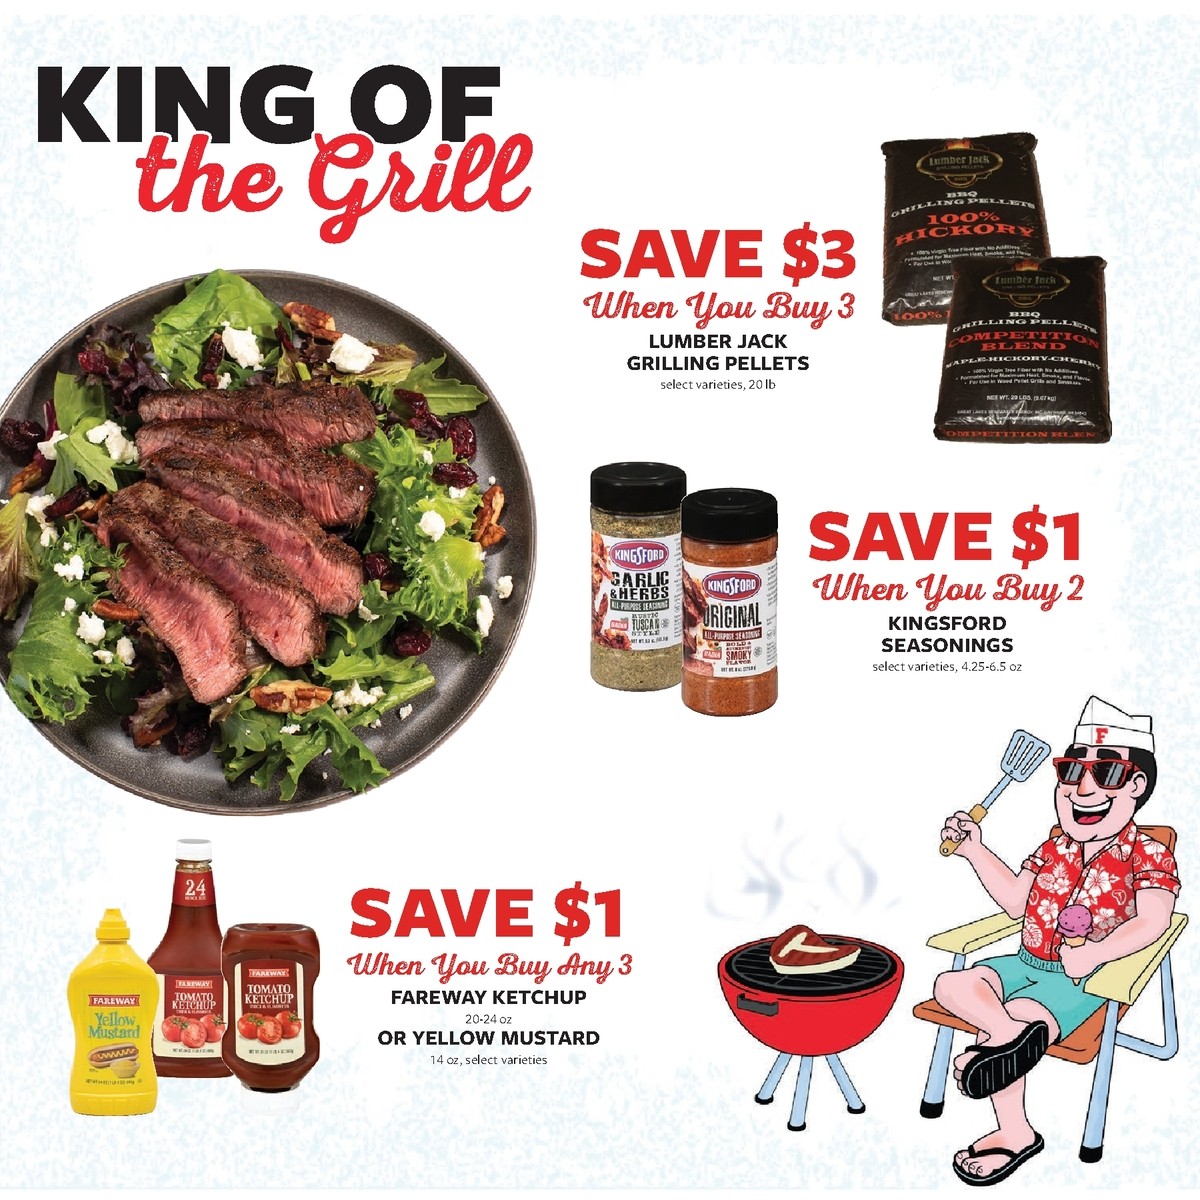 Fareway Monthly Ad Weekly Ad from June 2